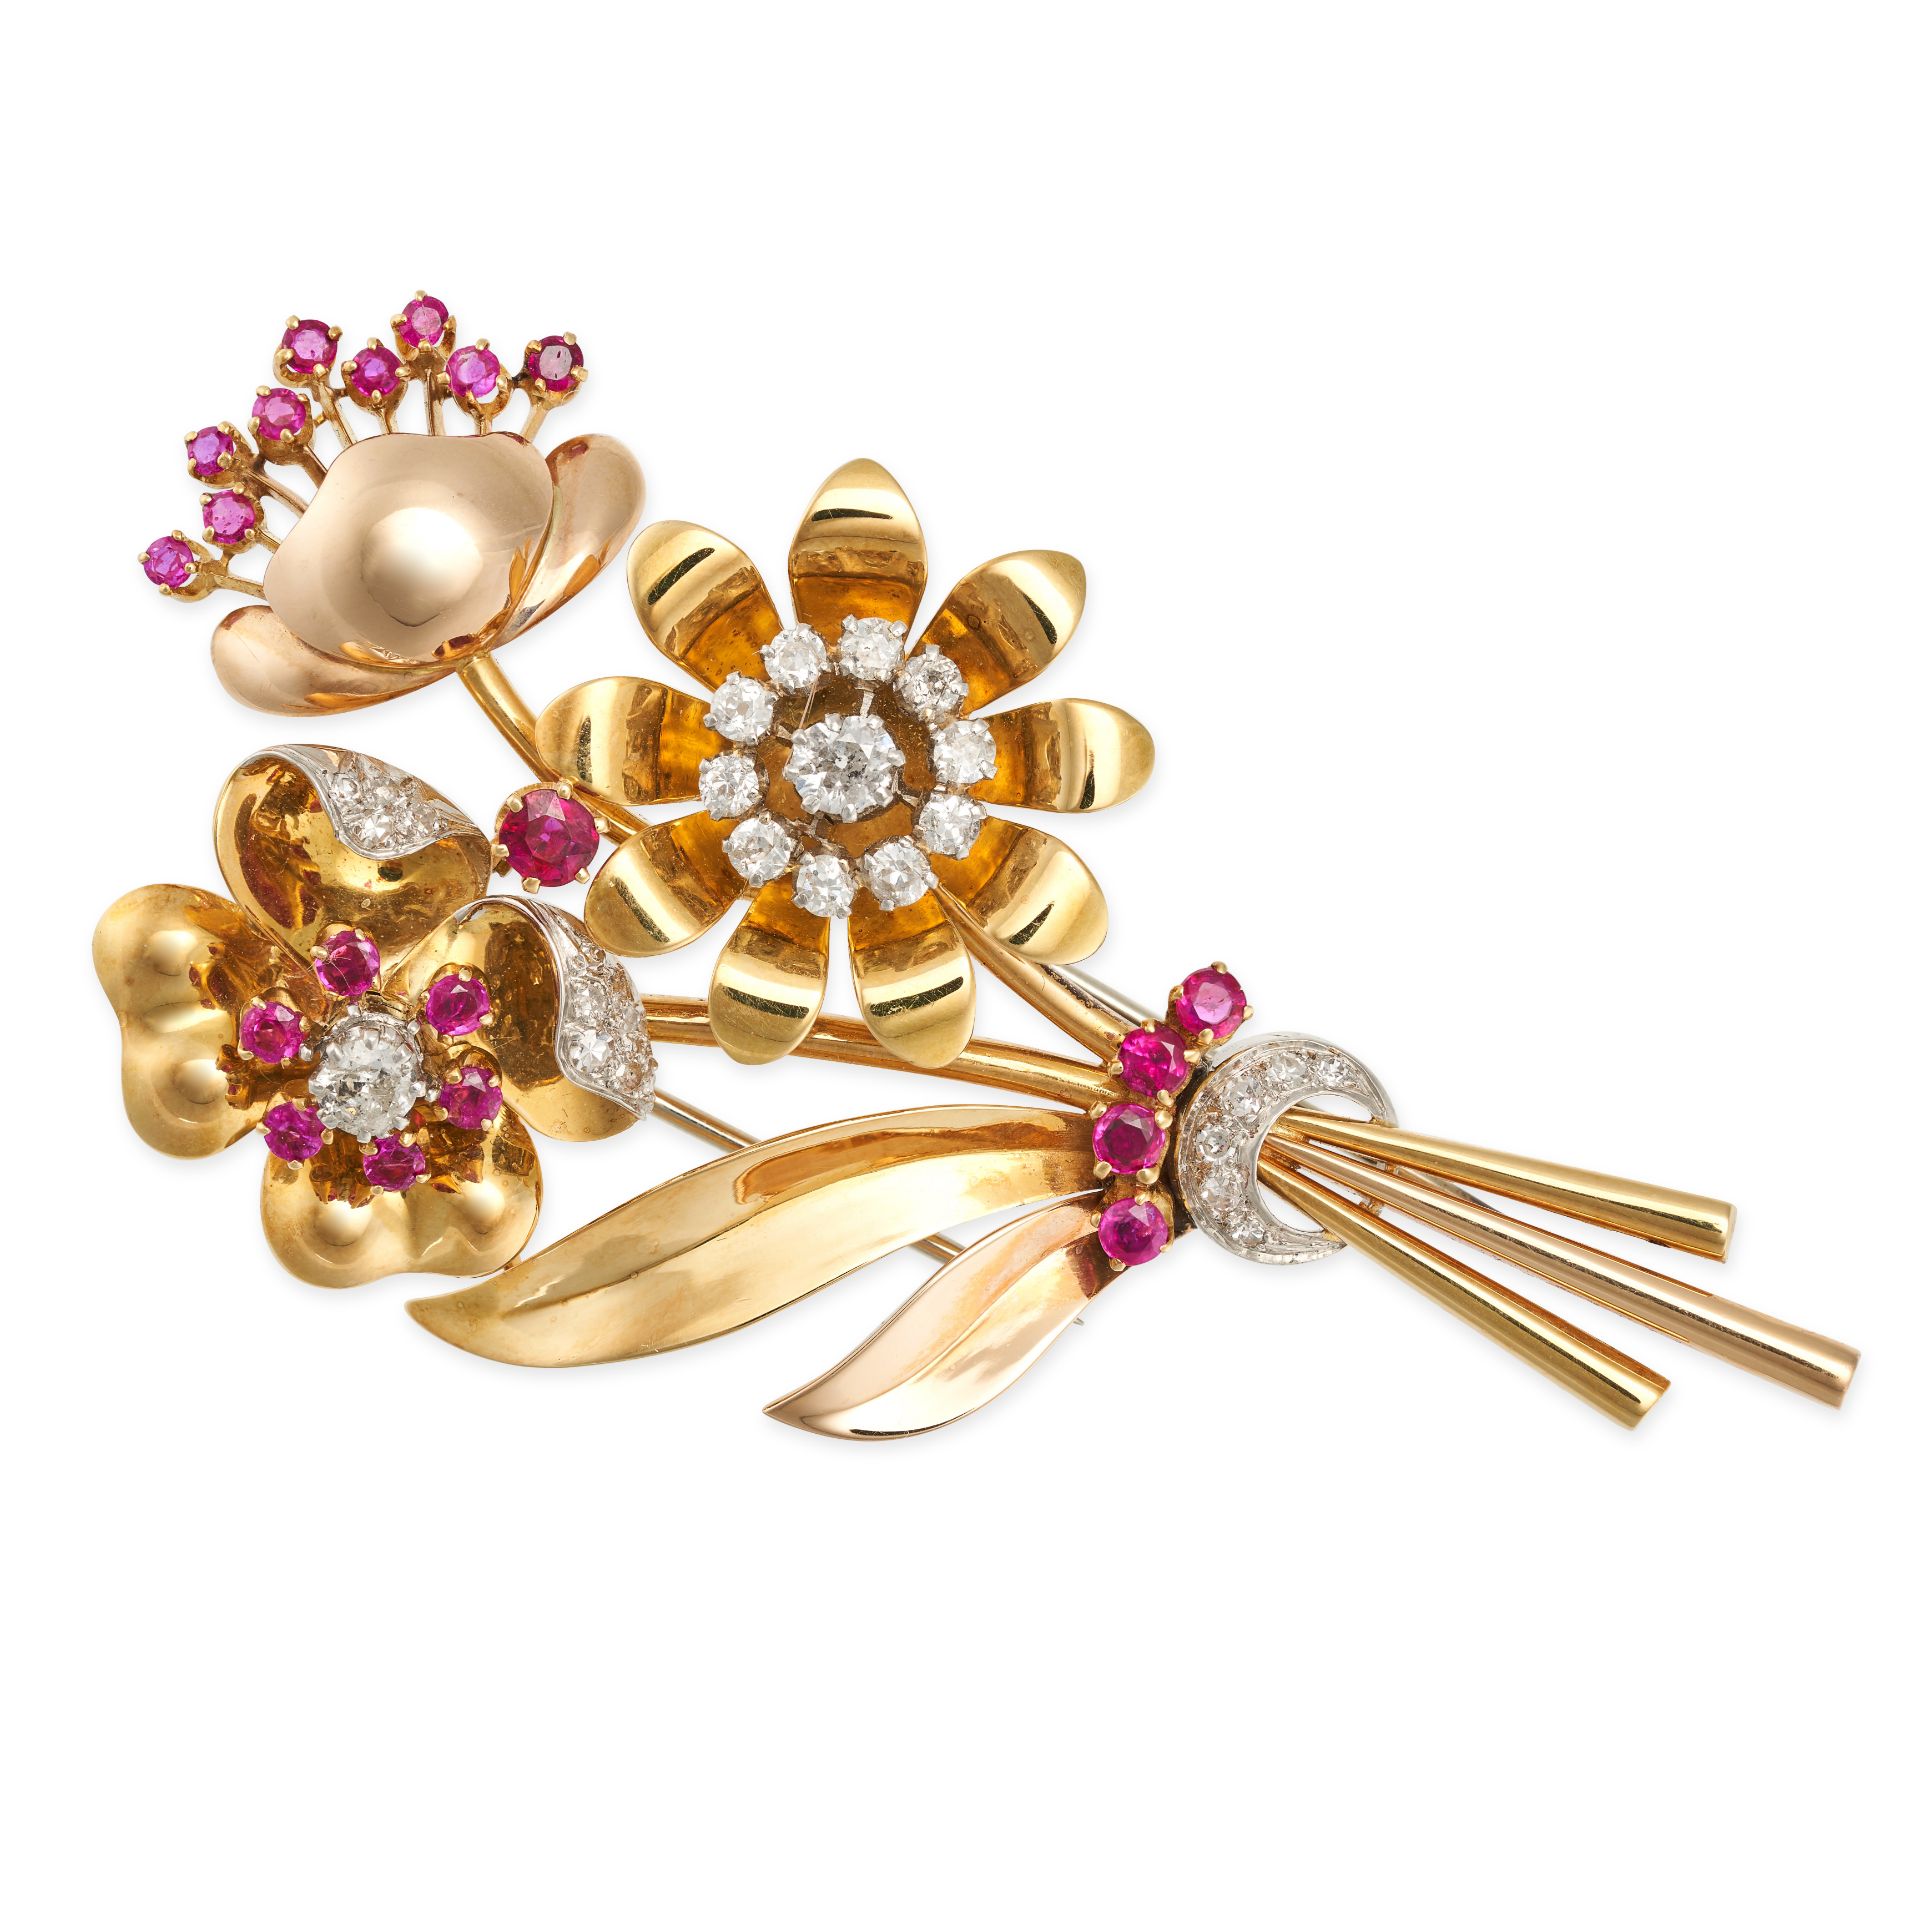 A VINTAGE RUBY AND DIAMOND FLOWER BROOCH in yellow gold and platinum, designed as a bouquet of th...